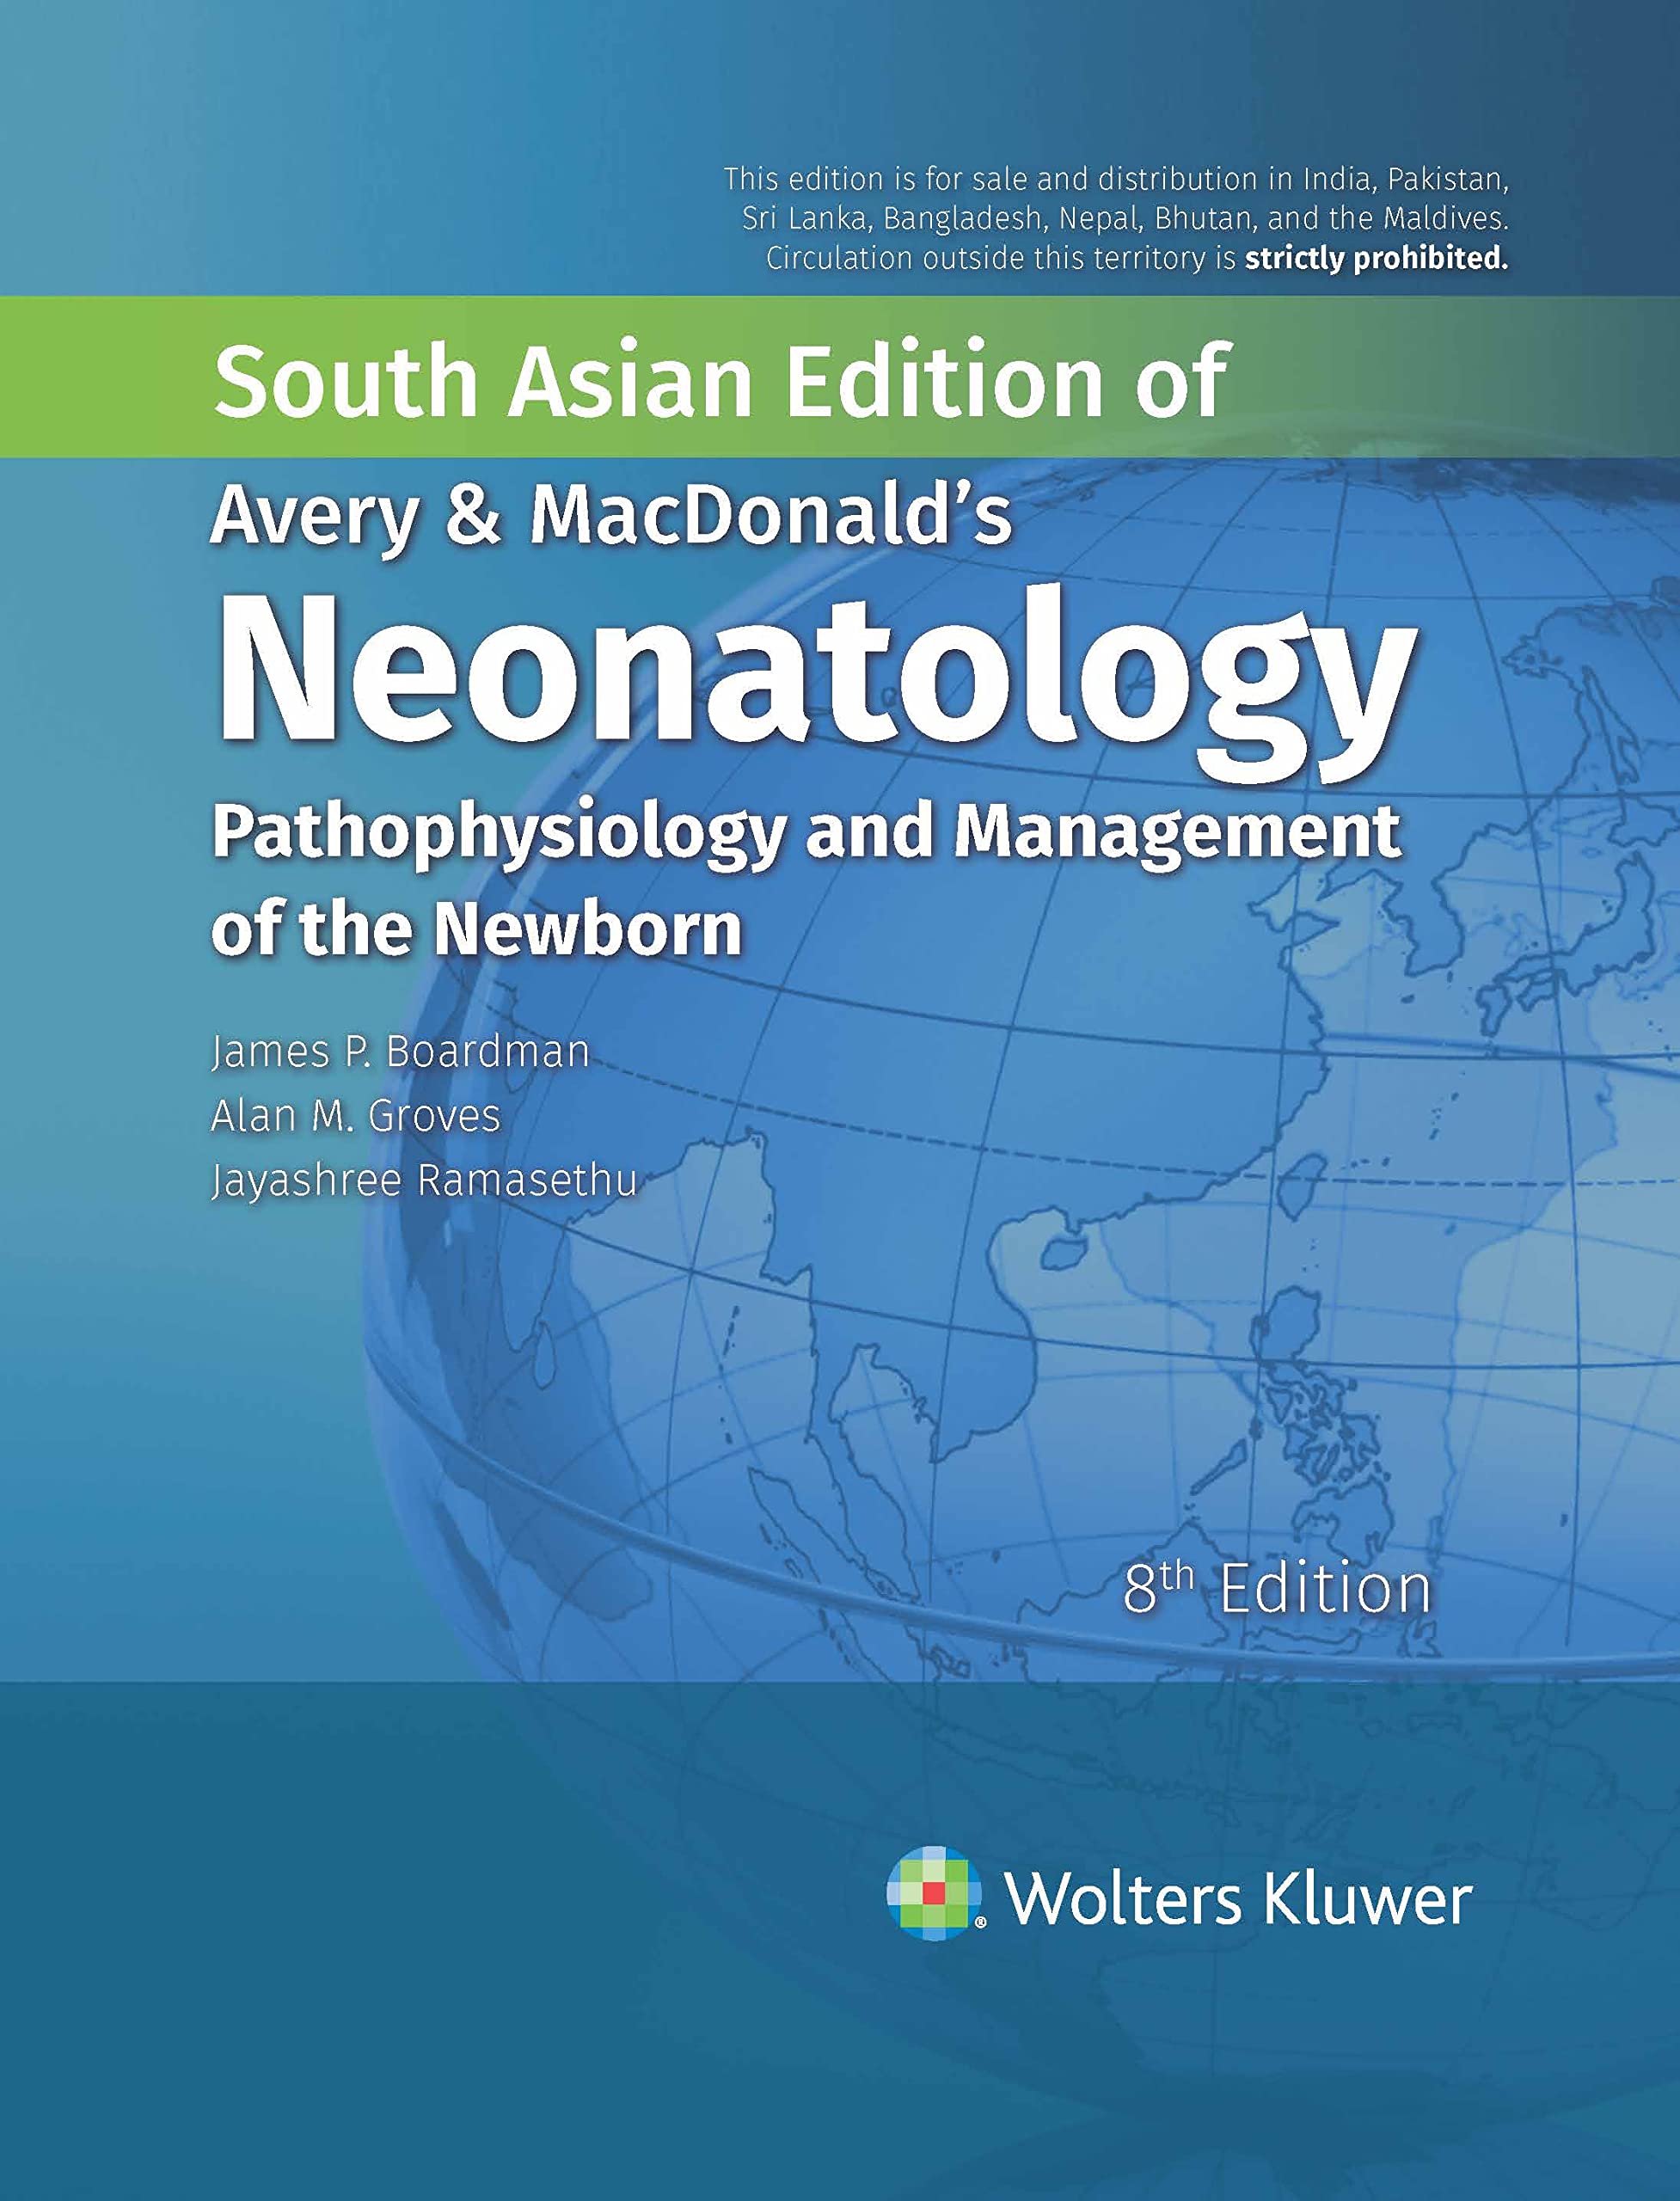 Avery & MacDonald's Neonatology: Pathophysiology and Management of the Newborn -AIBH Exclusive, 8e